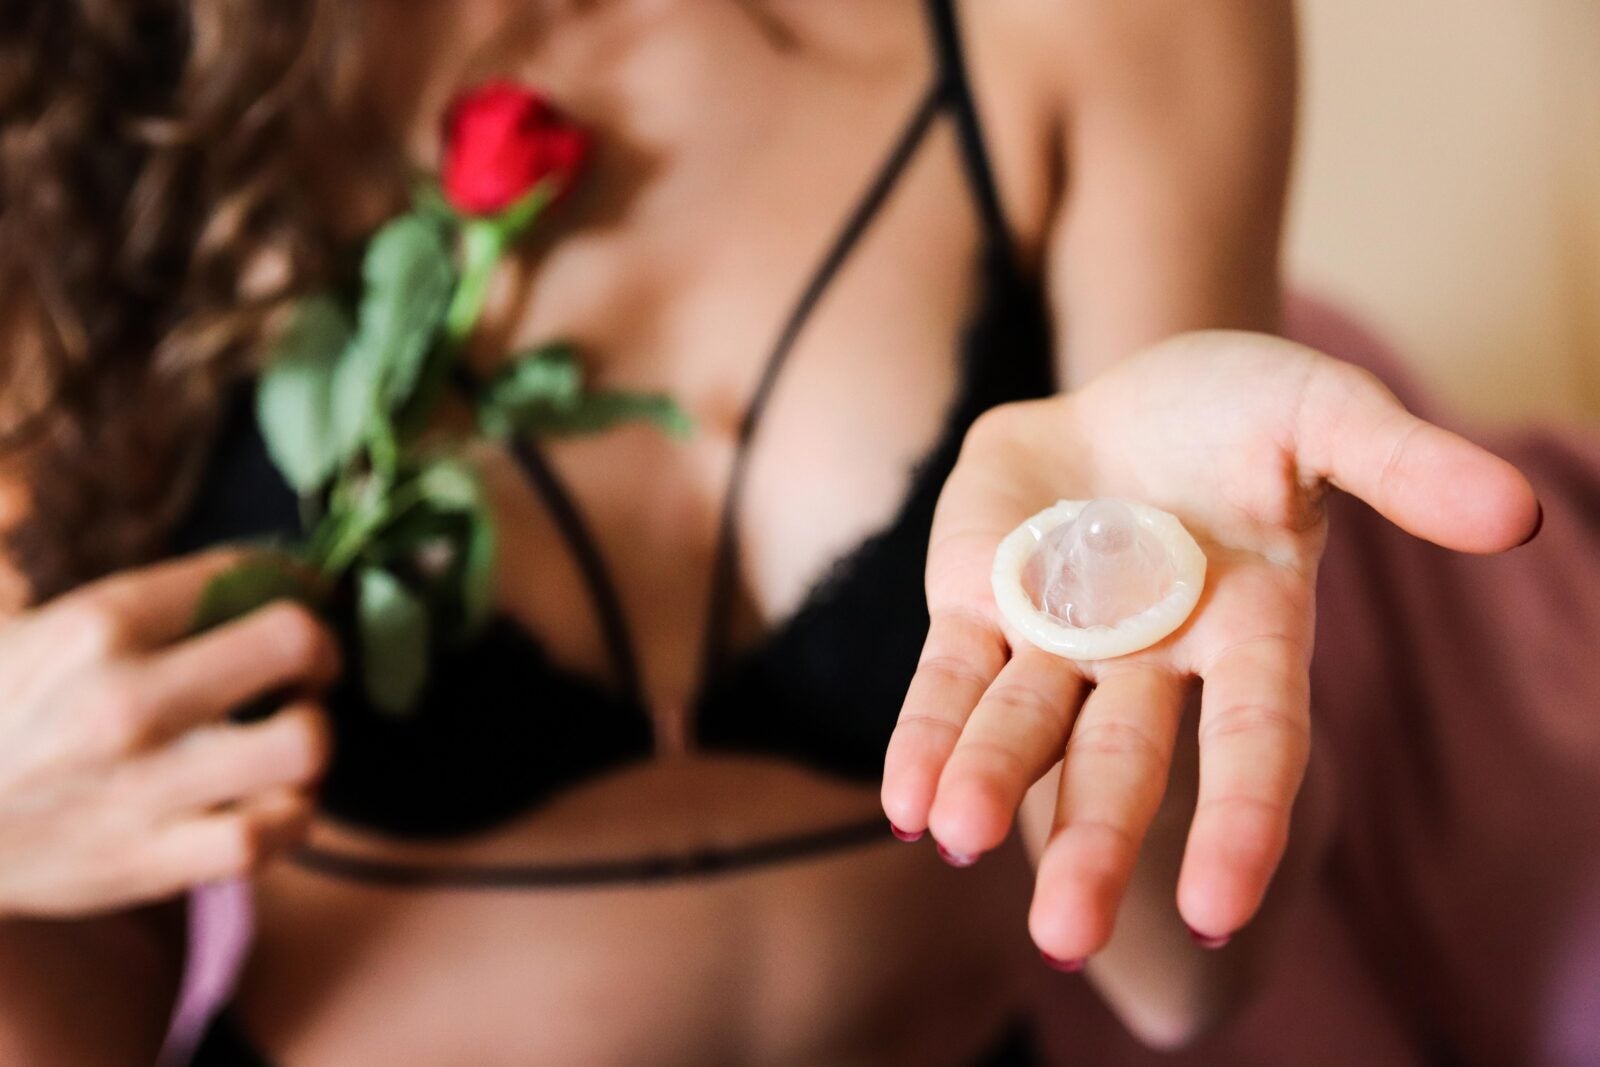 Woman wearing black bra and holding a red rose in one hand and a condom in the other hand.